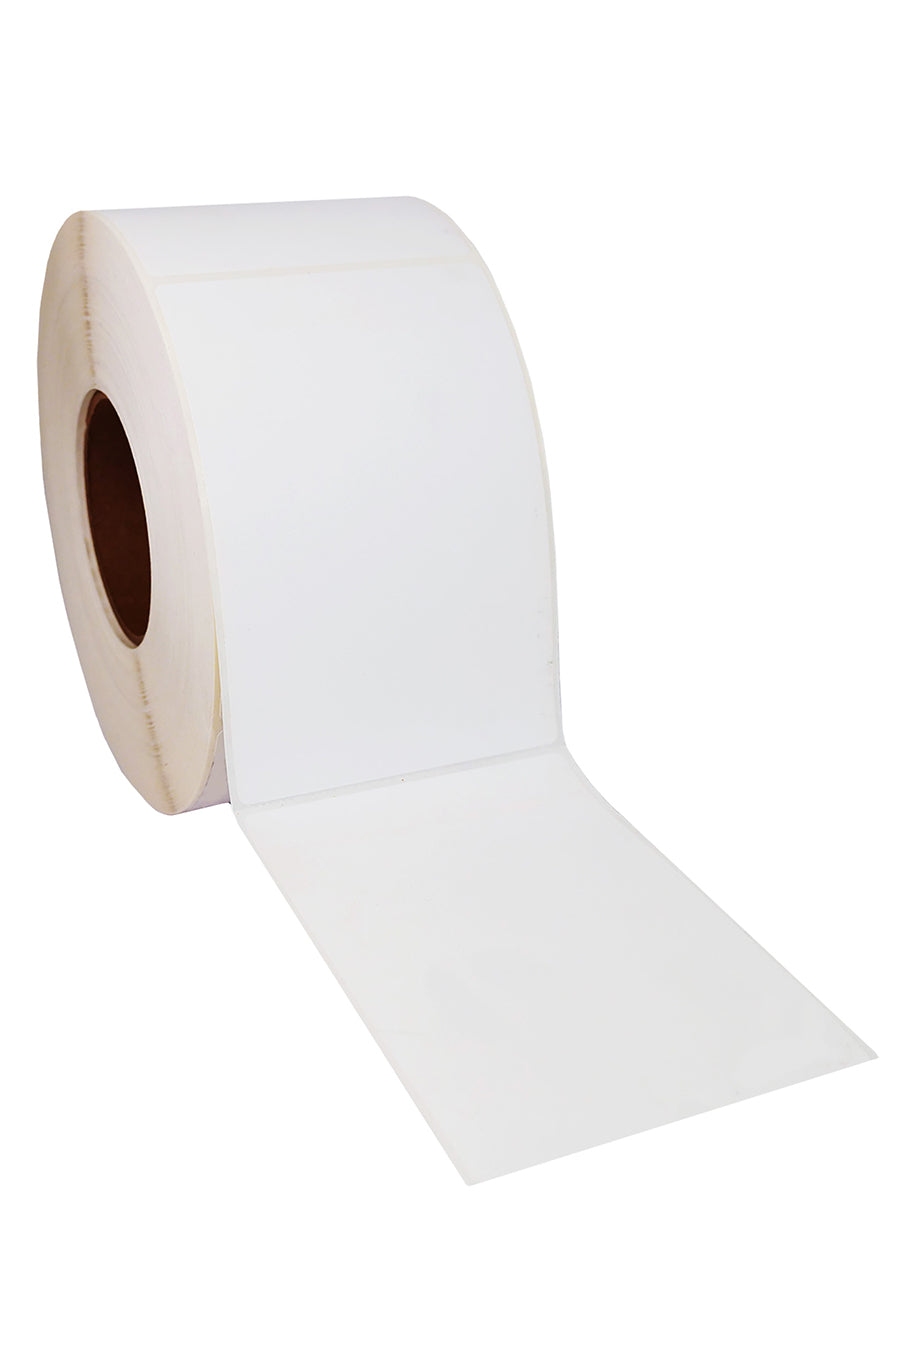 Thermal Transfer White Shipping Labels, 4" x 6", 1000/Roll, 4 Rolls/Ea